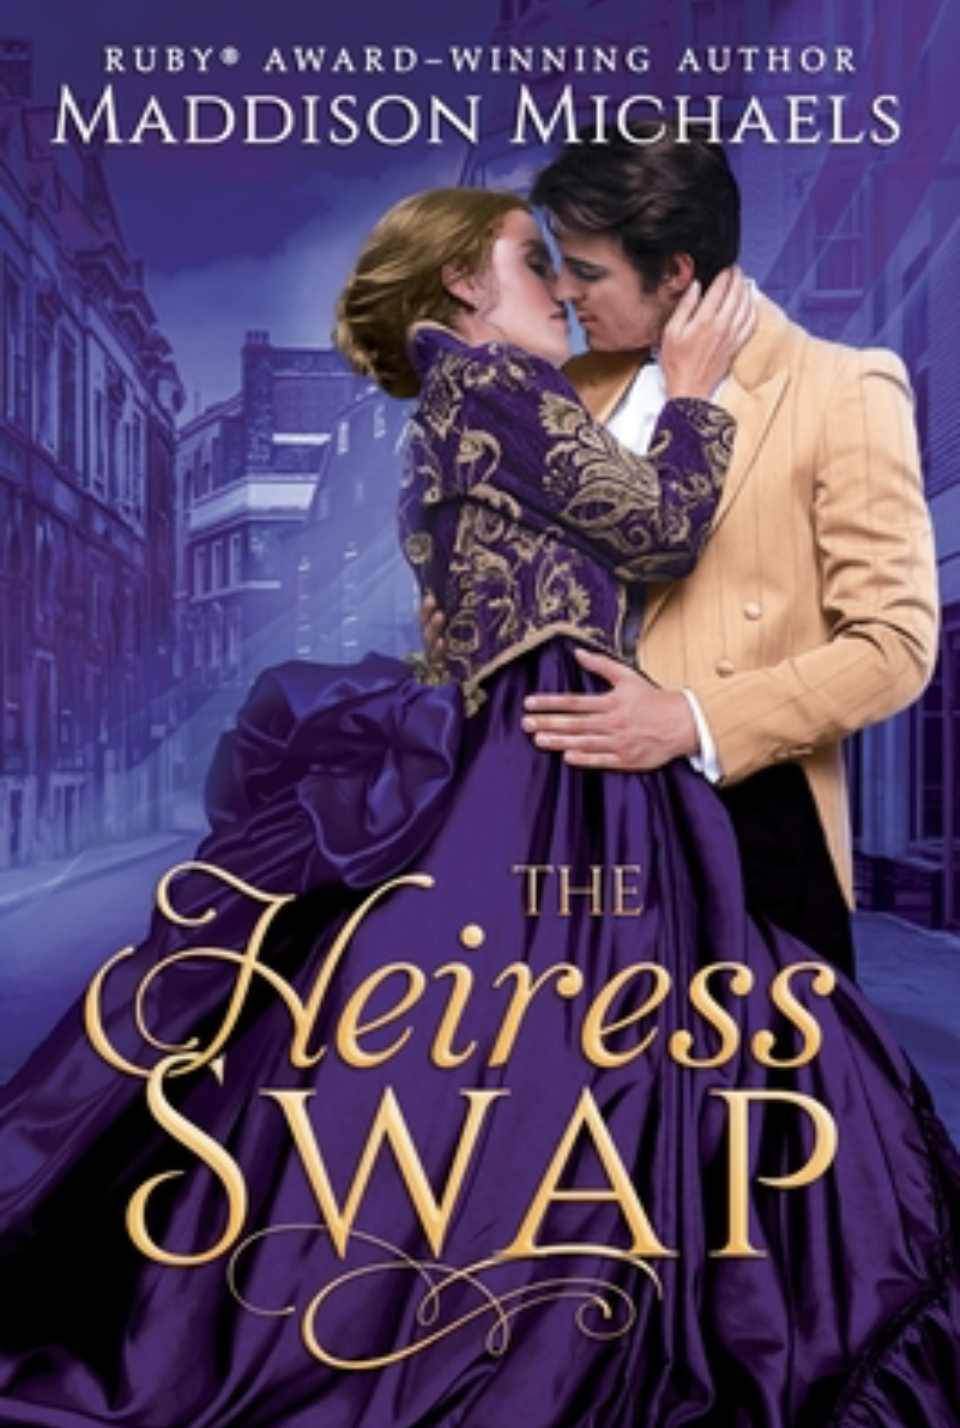 The Heiress Swap by Maddison Michaels